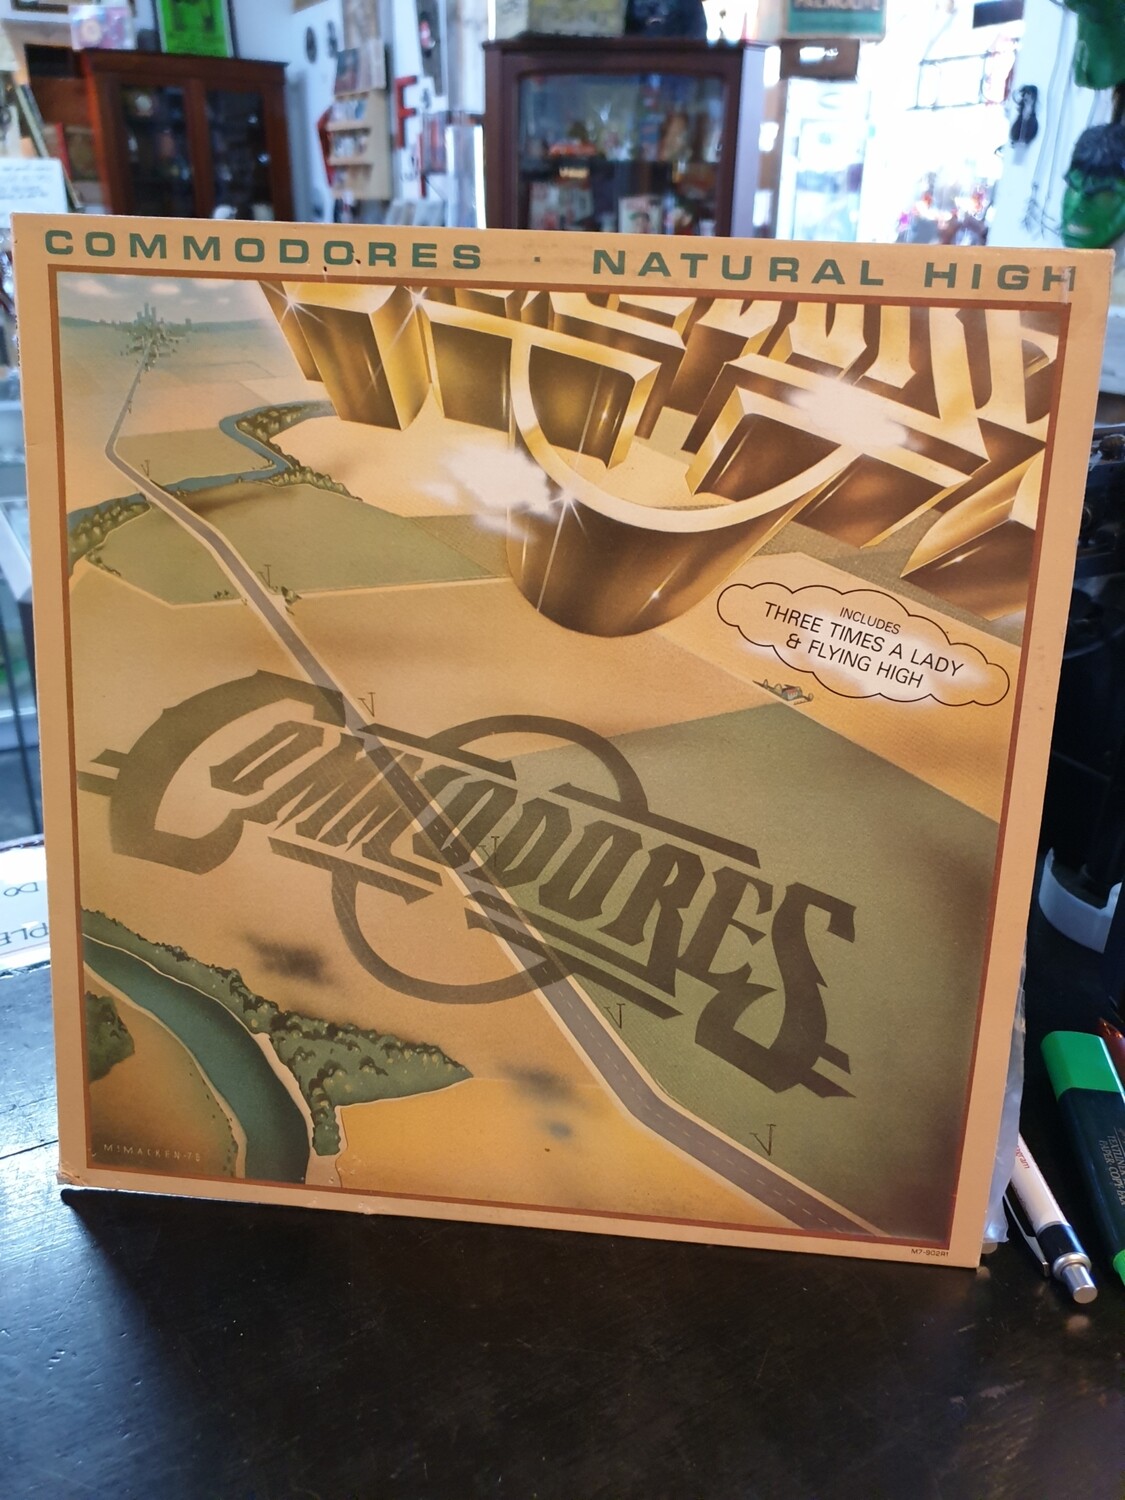 COMMODORES NATURAL HIGH